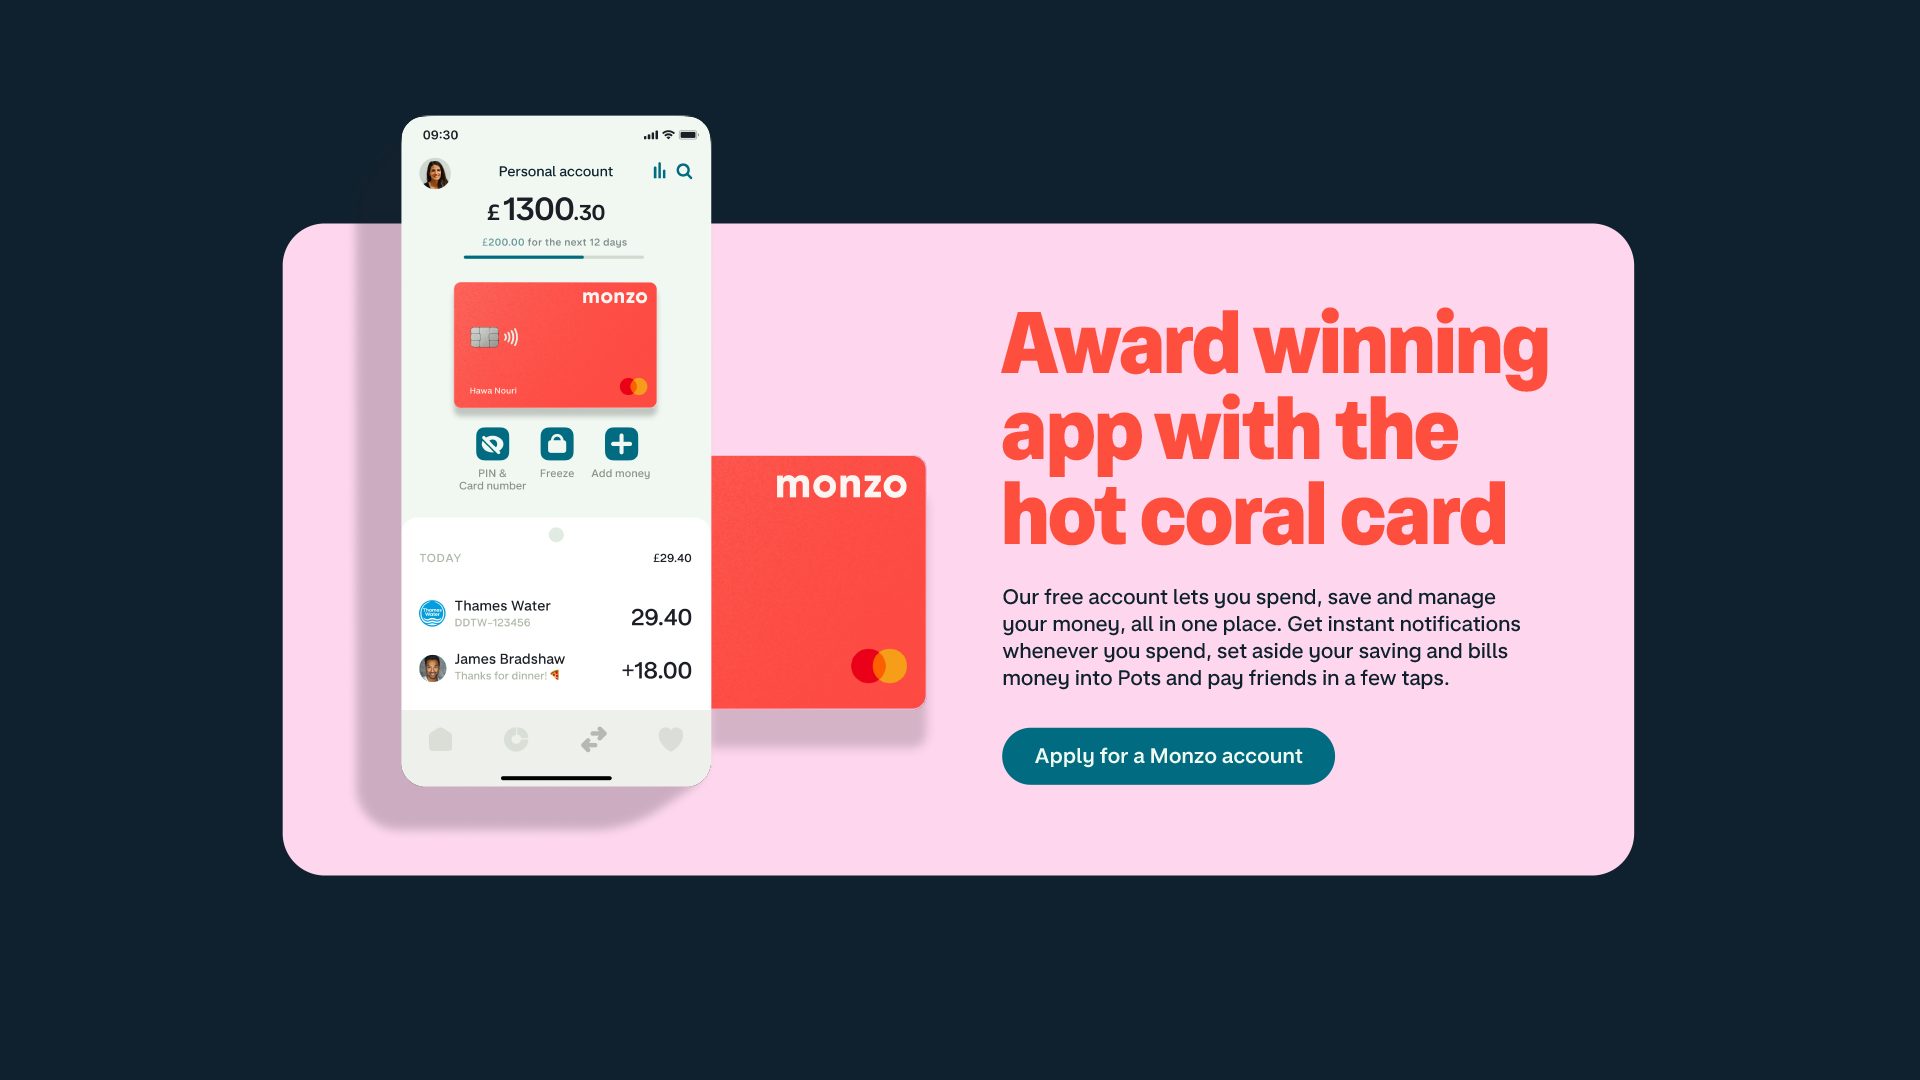 Image shows a Monzo graphic which reads 'Award winning app with the hot coral card' next to a screen from the app